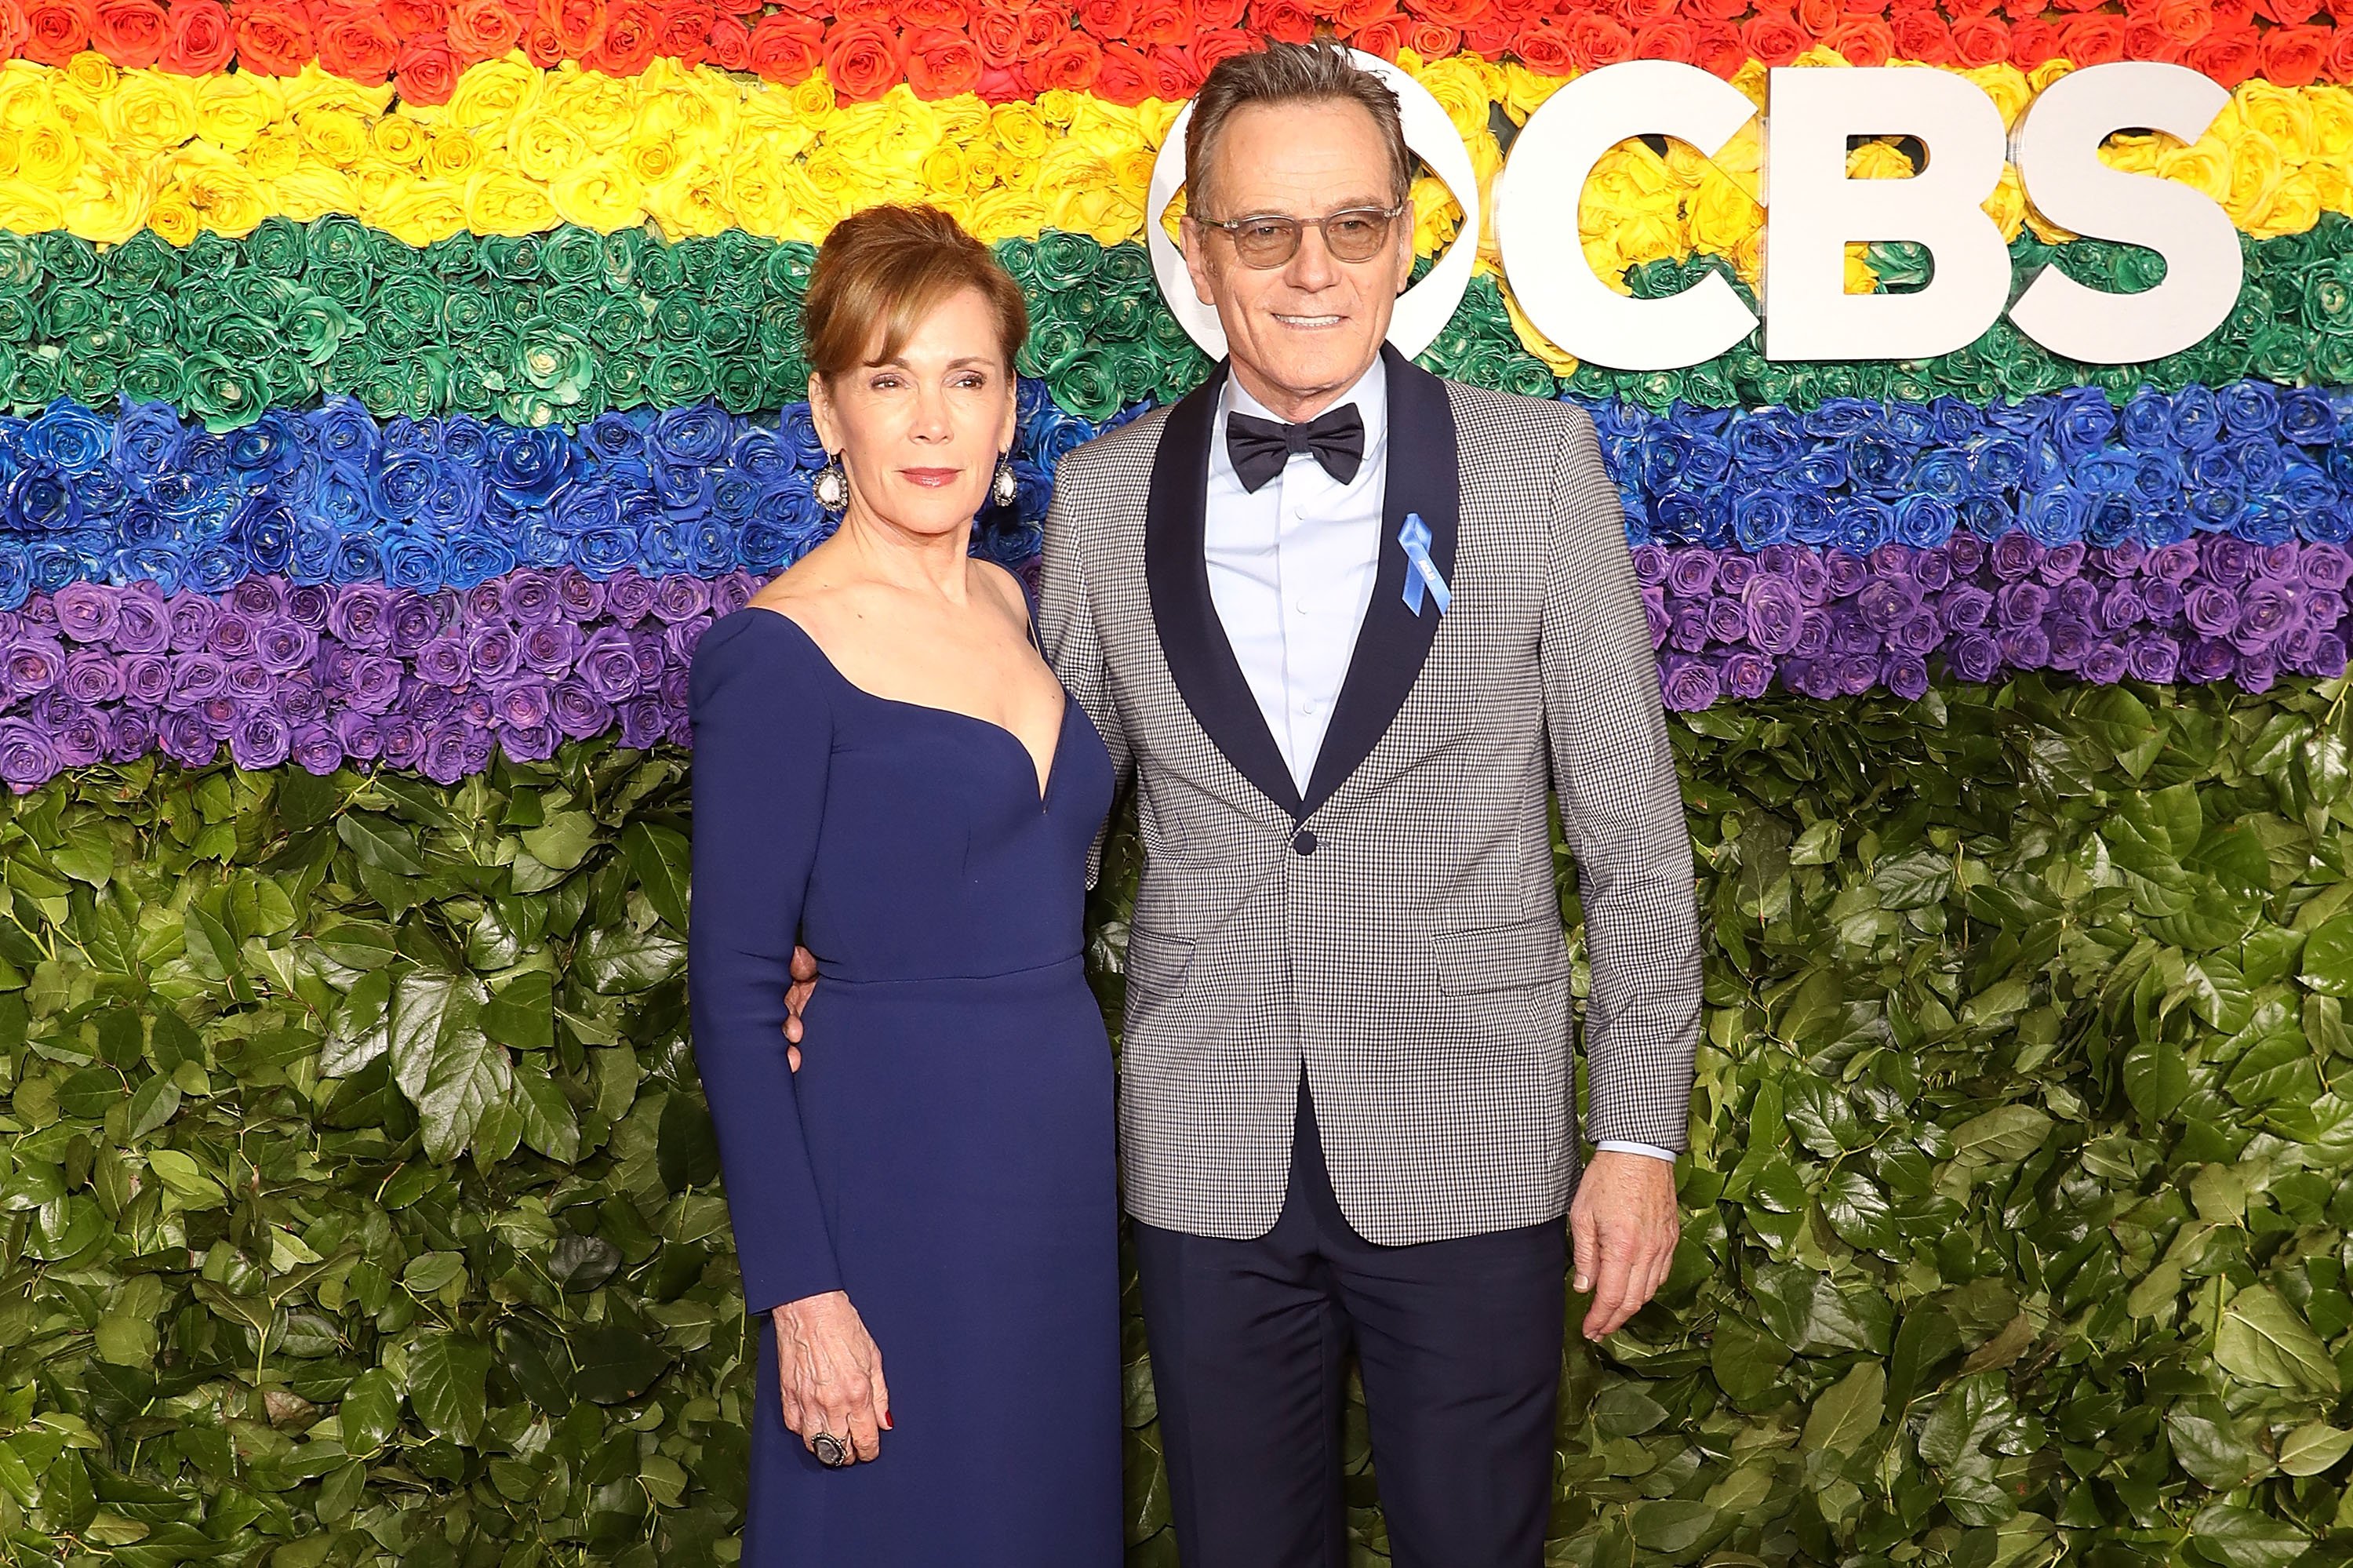 Robin Dearden and Bryan Cranston attend the 2019 Tony Awards at Radio City Music Hall on June 9, 2019 in New York City | Source: Getty Images